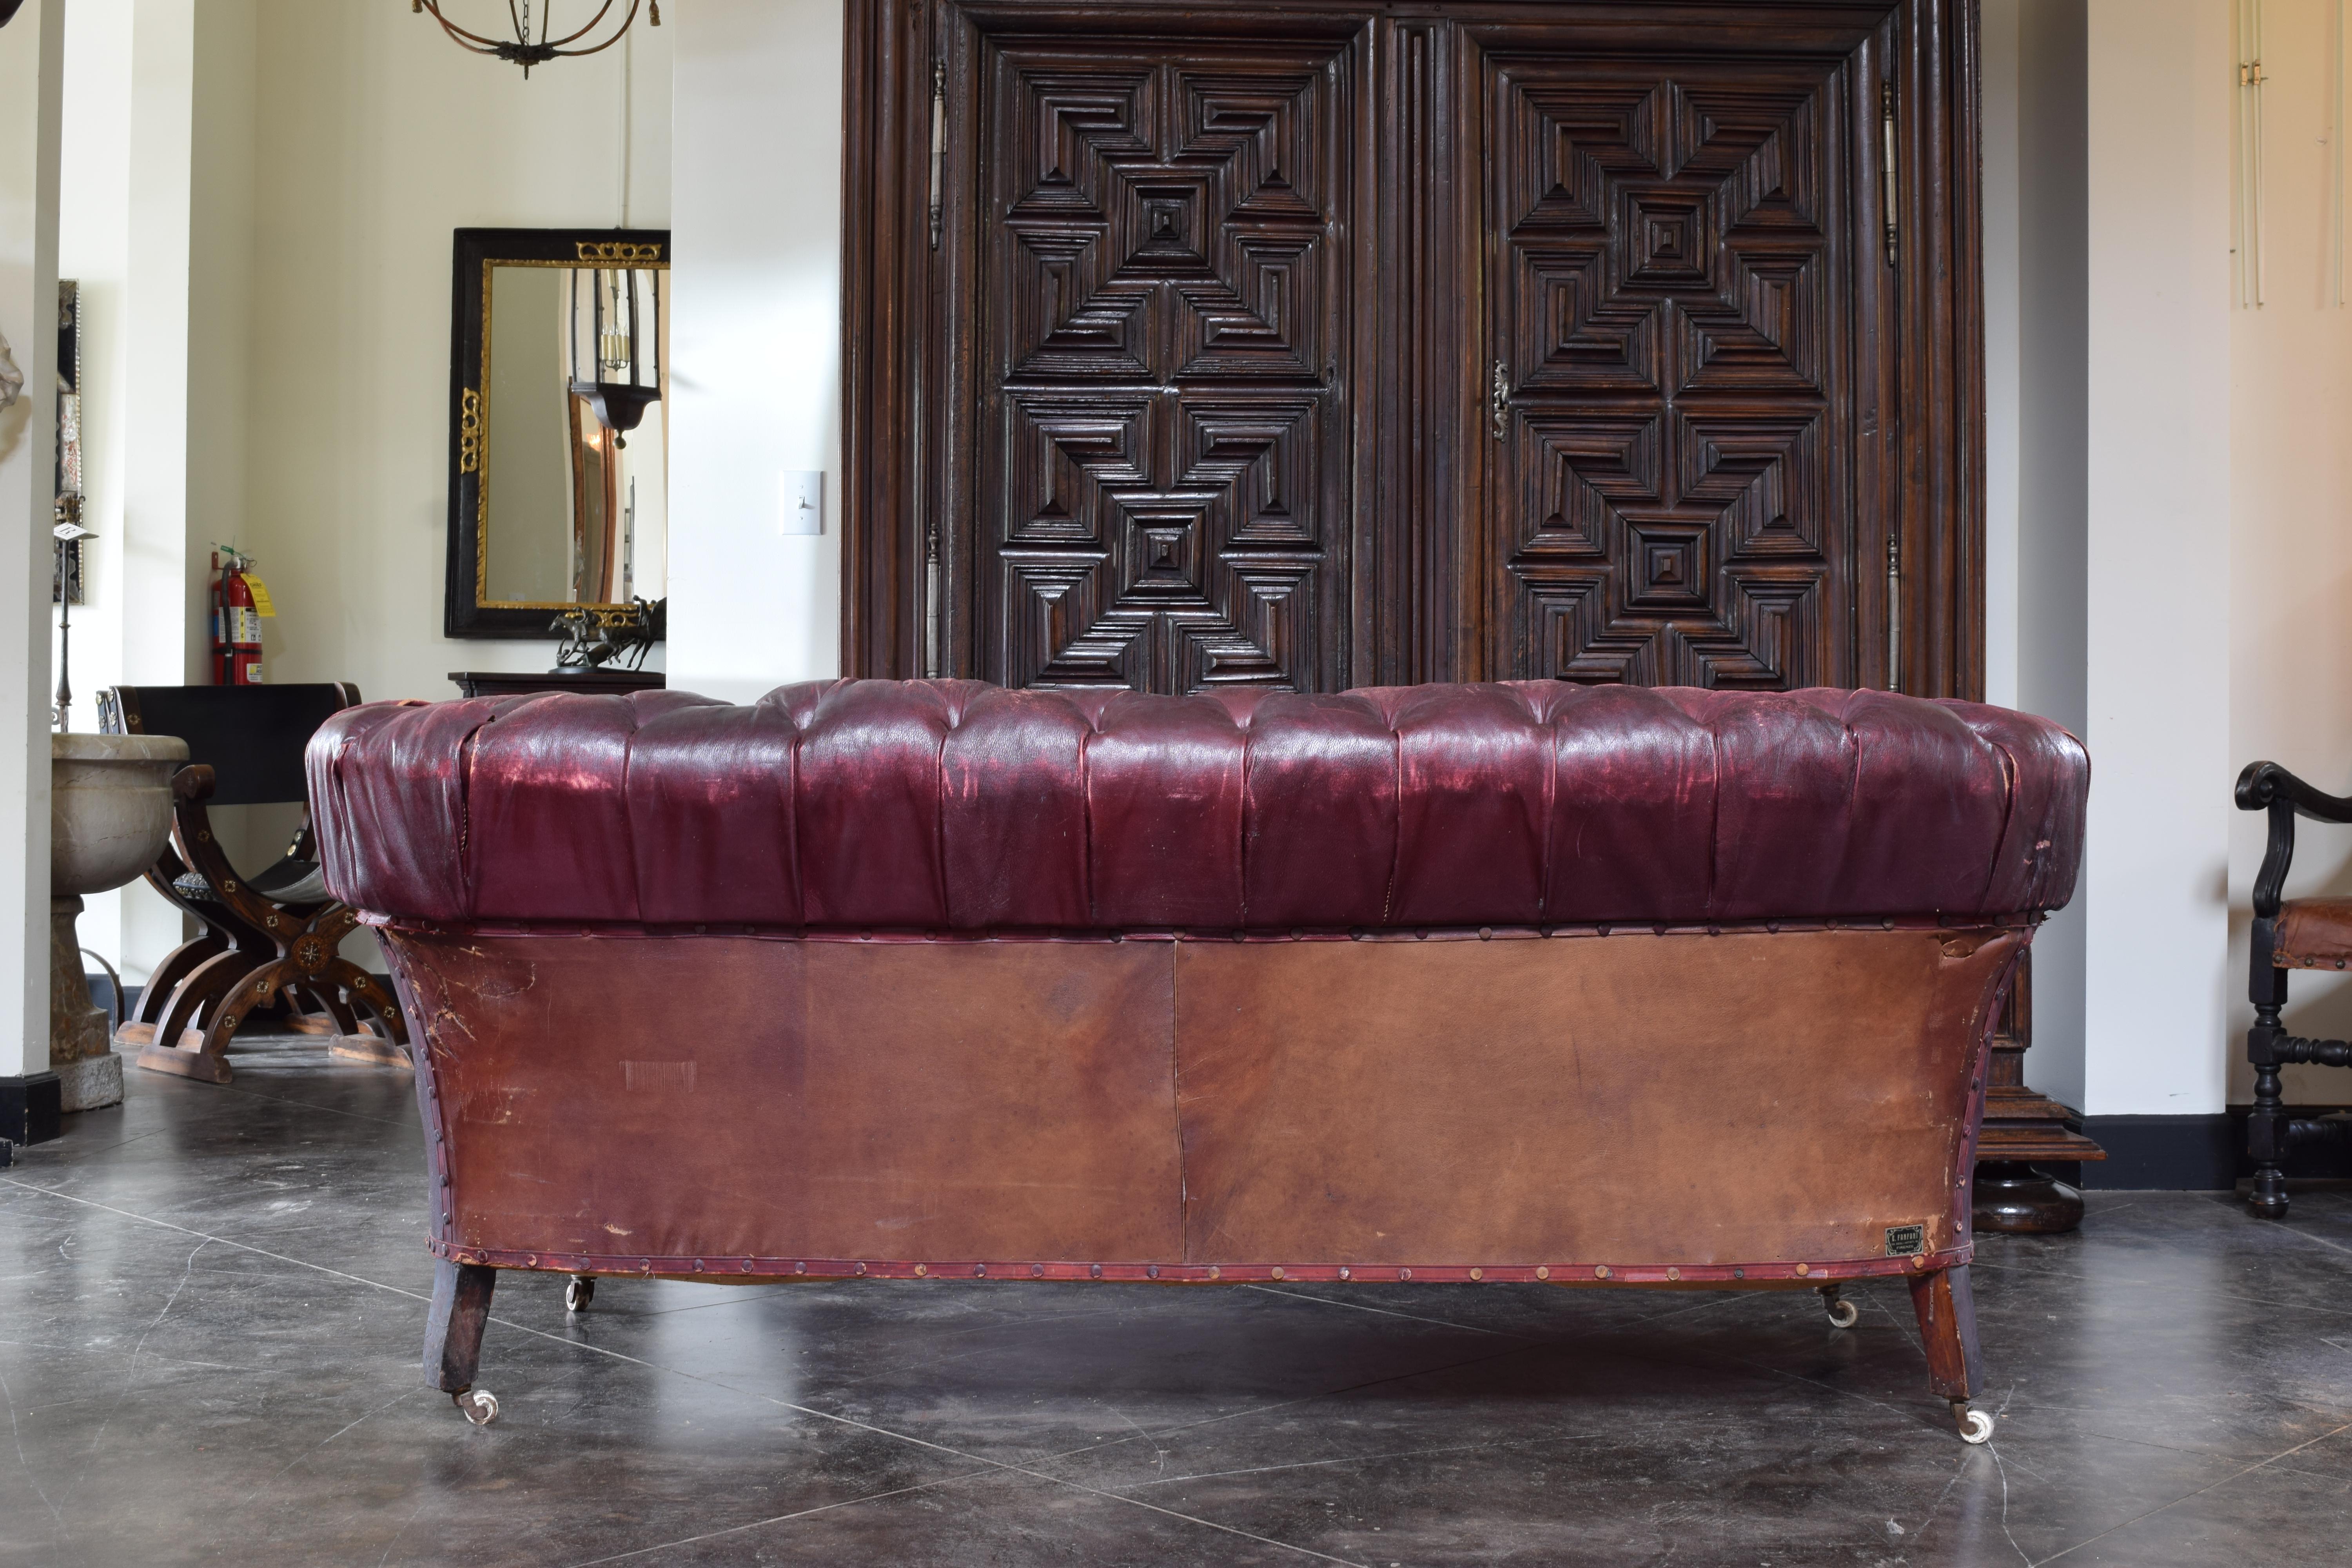 Italian Tufted Leather Upholstered Chesterfield Sofa, late 19thc In Fair Condition For Sale In Atlanta, GA